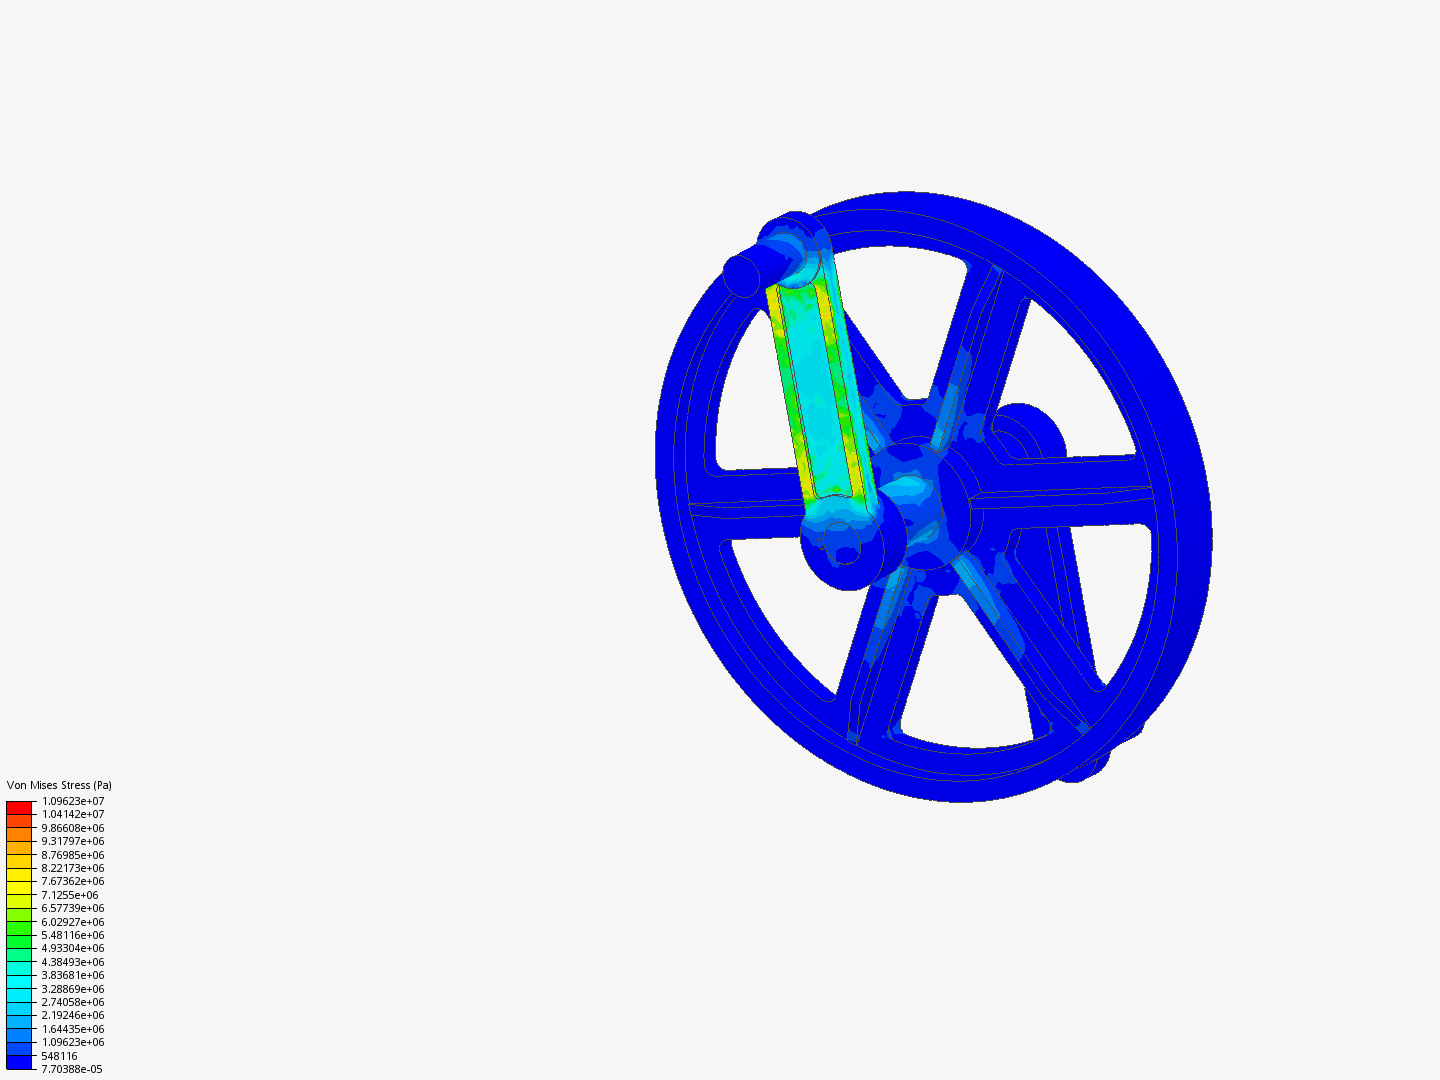 Practical Exam: Simulation of a Crank Assembly - Copy 1 image